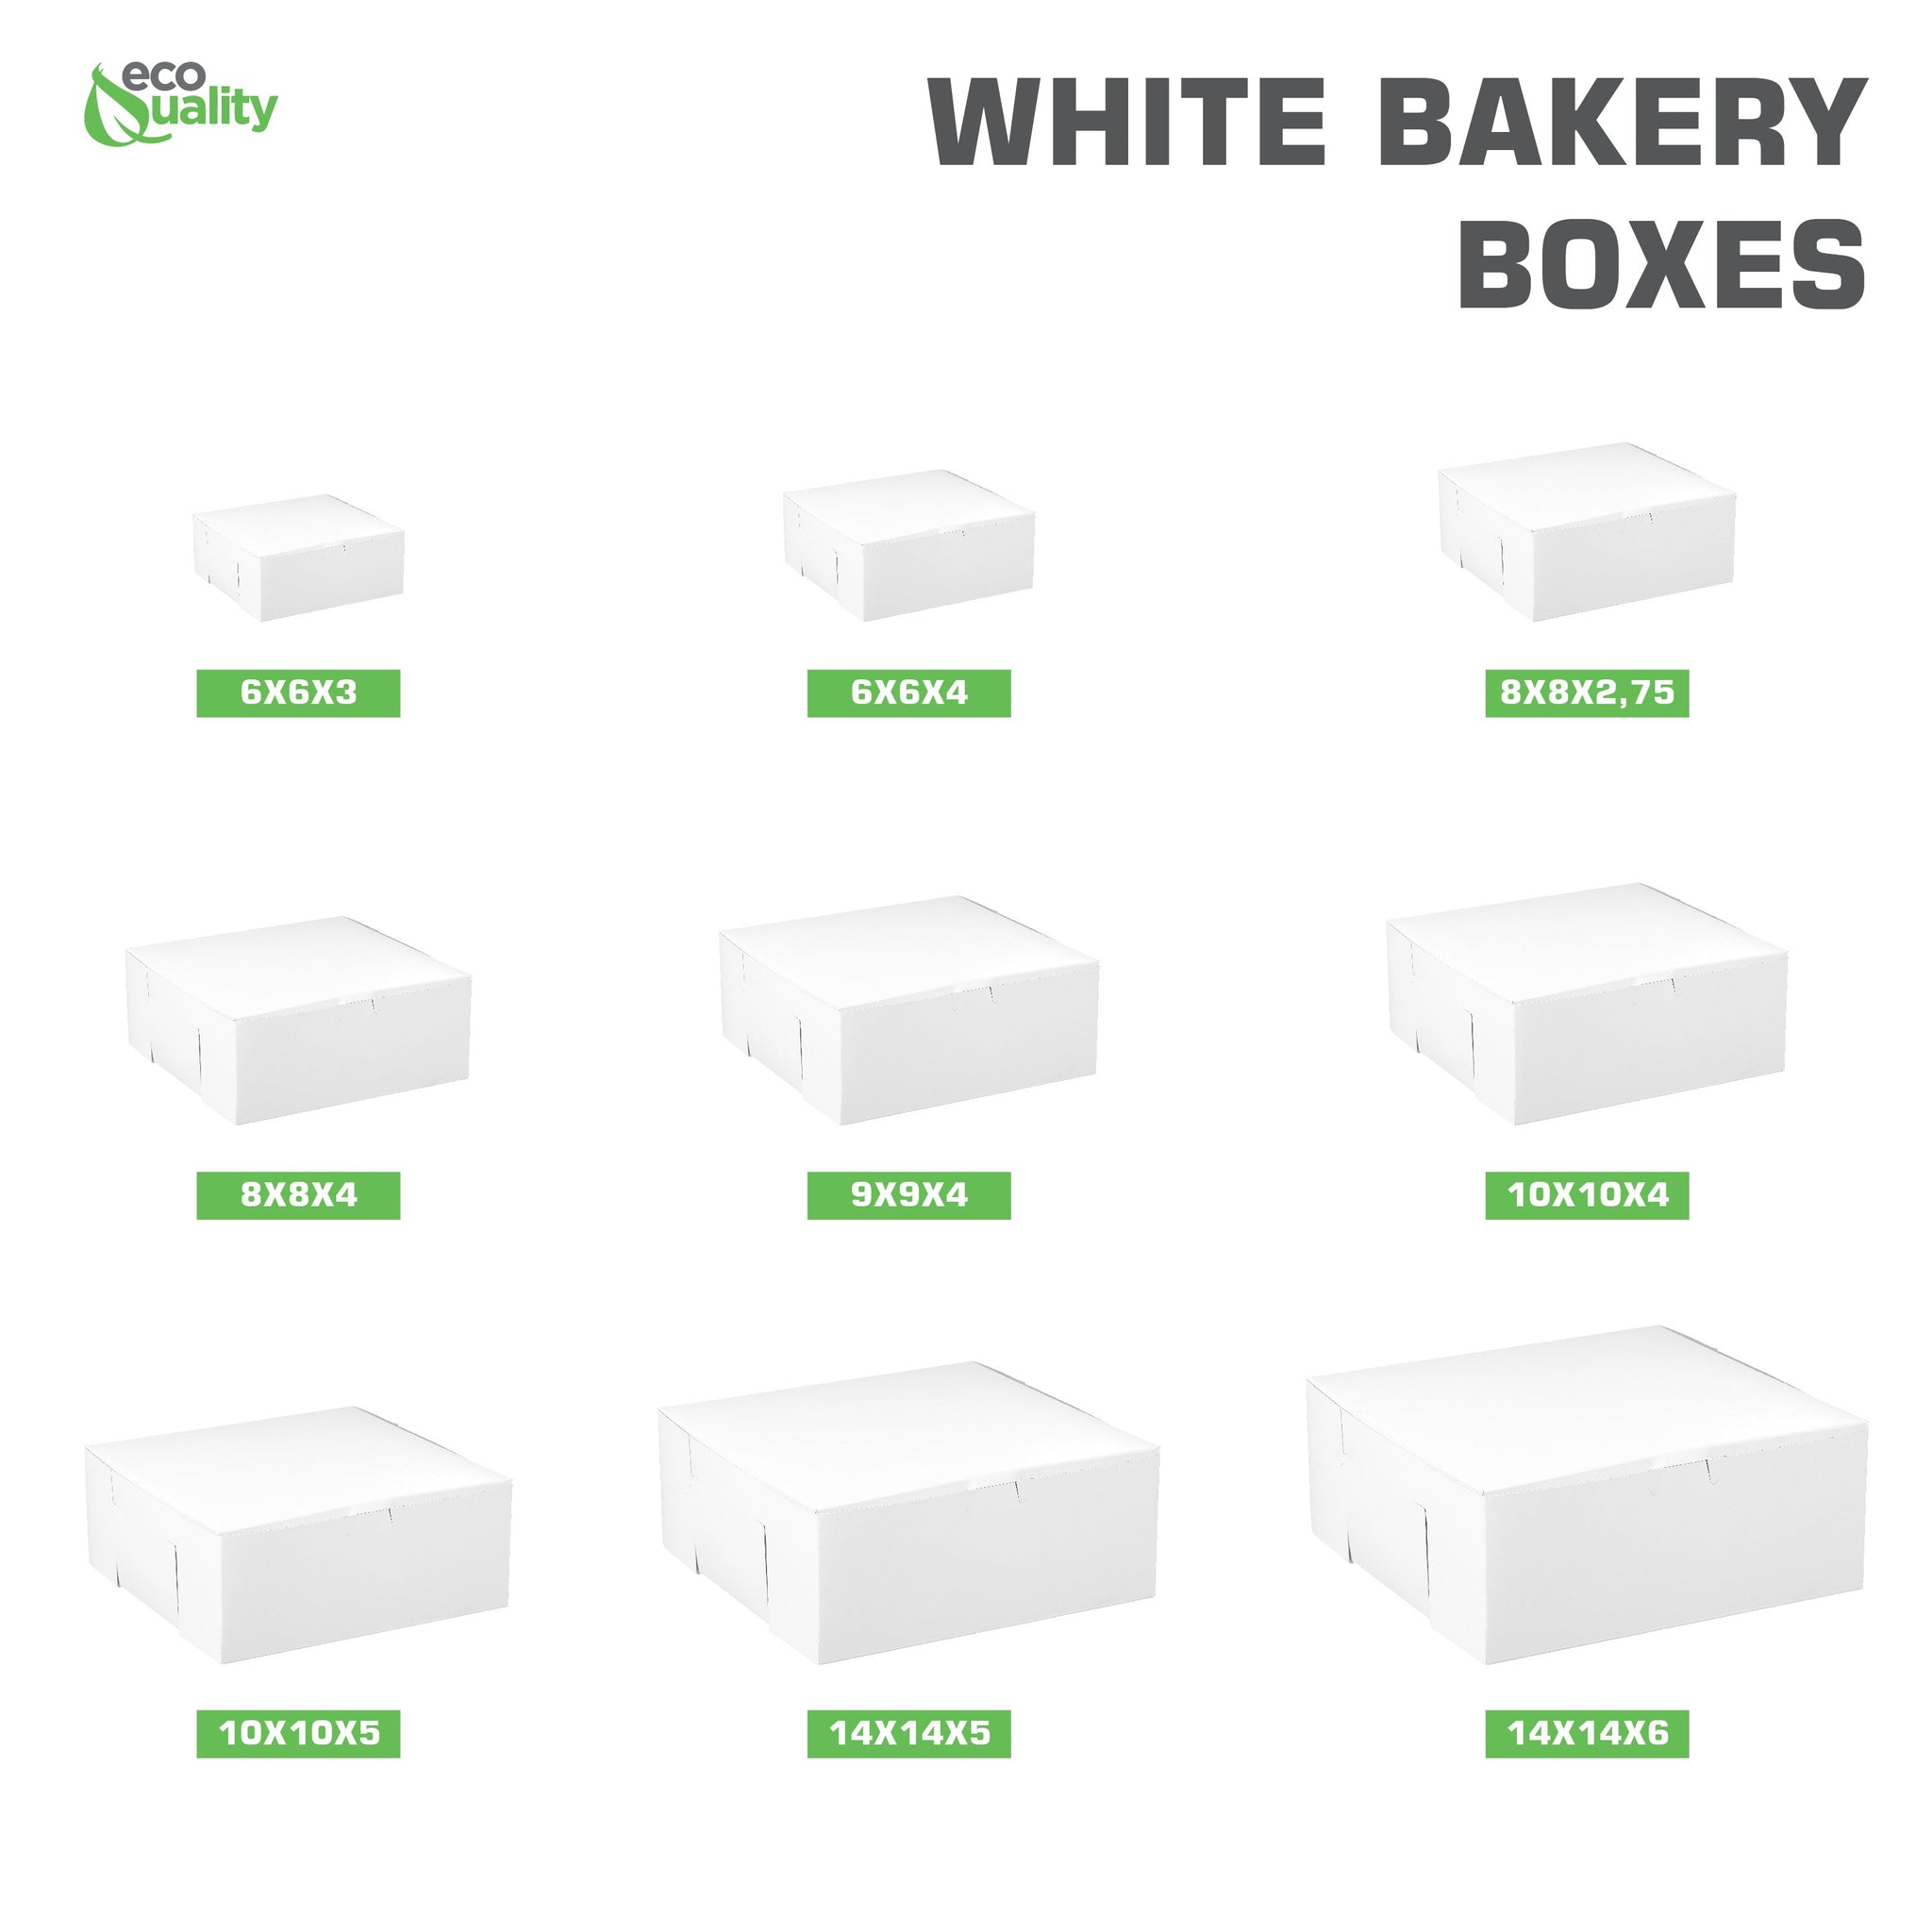 White Kraft Paperboard for Home or Retail  White Bakery Pastry Boxes  Restaurant Food Trucks Caterers take out sustainable  Recyclable for Pastries  Pies  Paper Cardboard  Gift Box  Ecofriendly  donuts  DIY Arts and Crafts Personalizable customizable  Cookies  Catering Restaurant Cafe Buffet Event Party  Cakes  Baby Shower  affordable bulk economical commercial wholesale  14